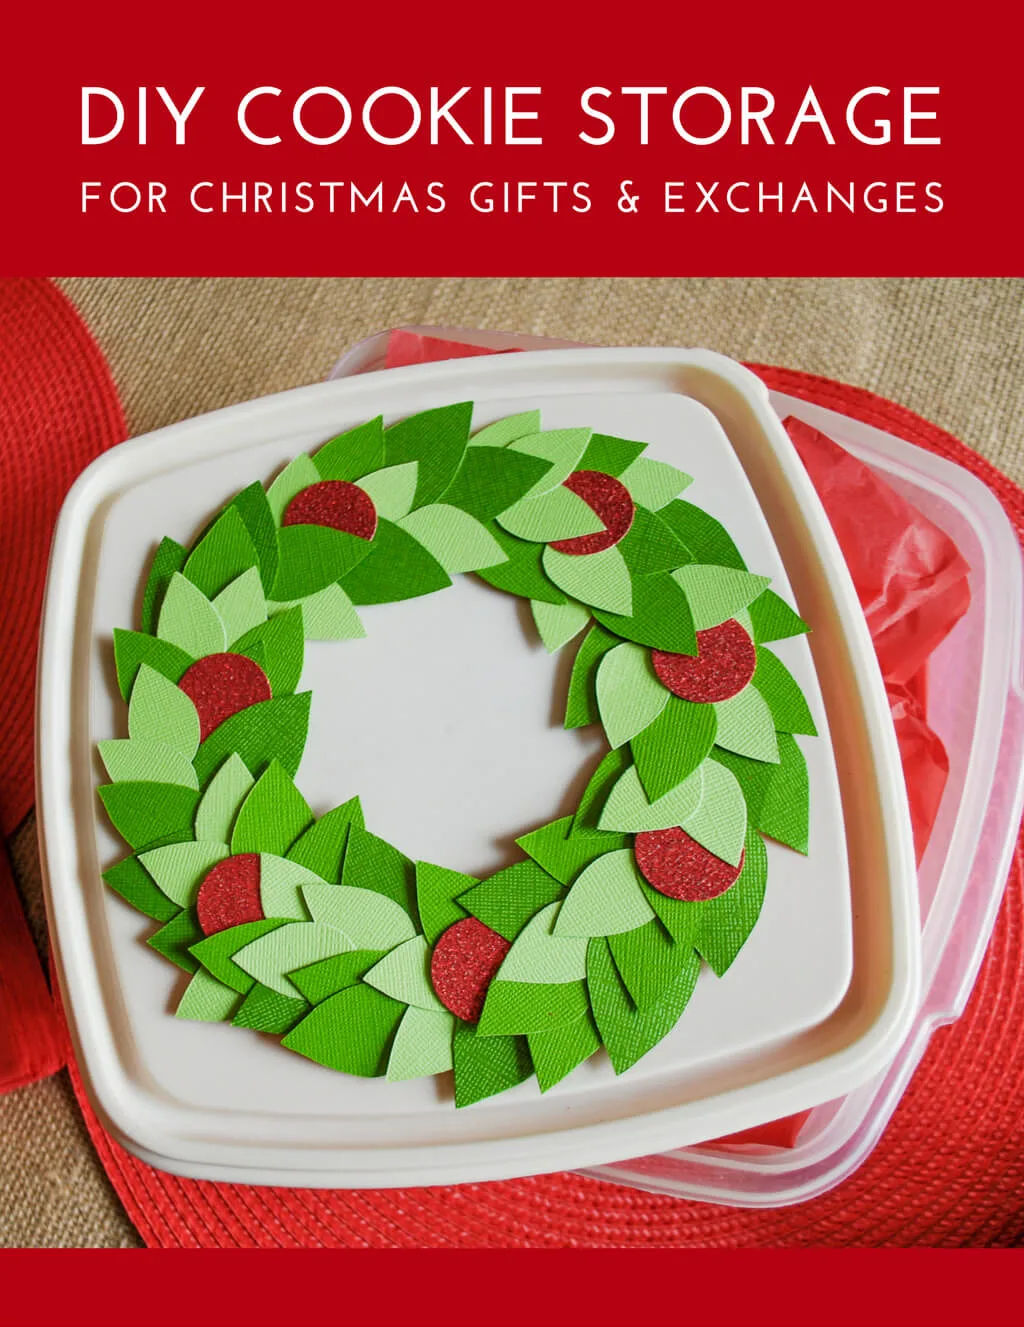 Decorate tupperware storage containers with a DIY paper wreath for holiday cookie exchanges - it removes easily to wash and re-use next year. #tupperware #velcrobrand #spon #handmadewithjoann #christmas #cookies #christmascookies #wreath #papercrafts #christmaswreath